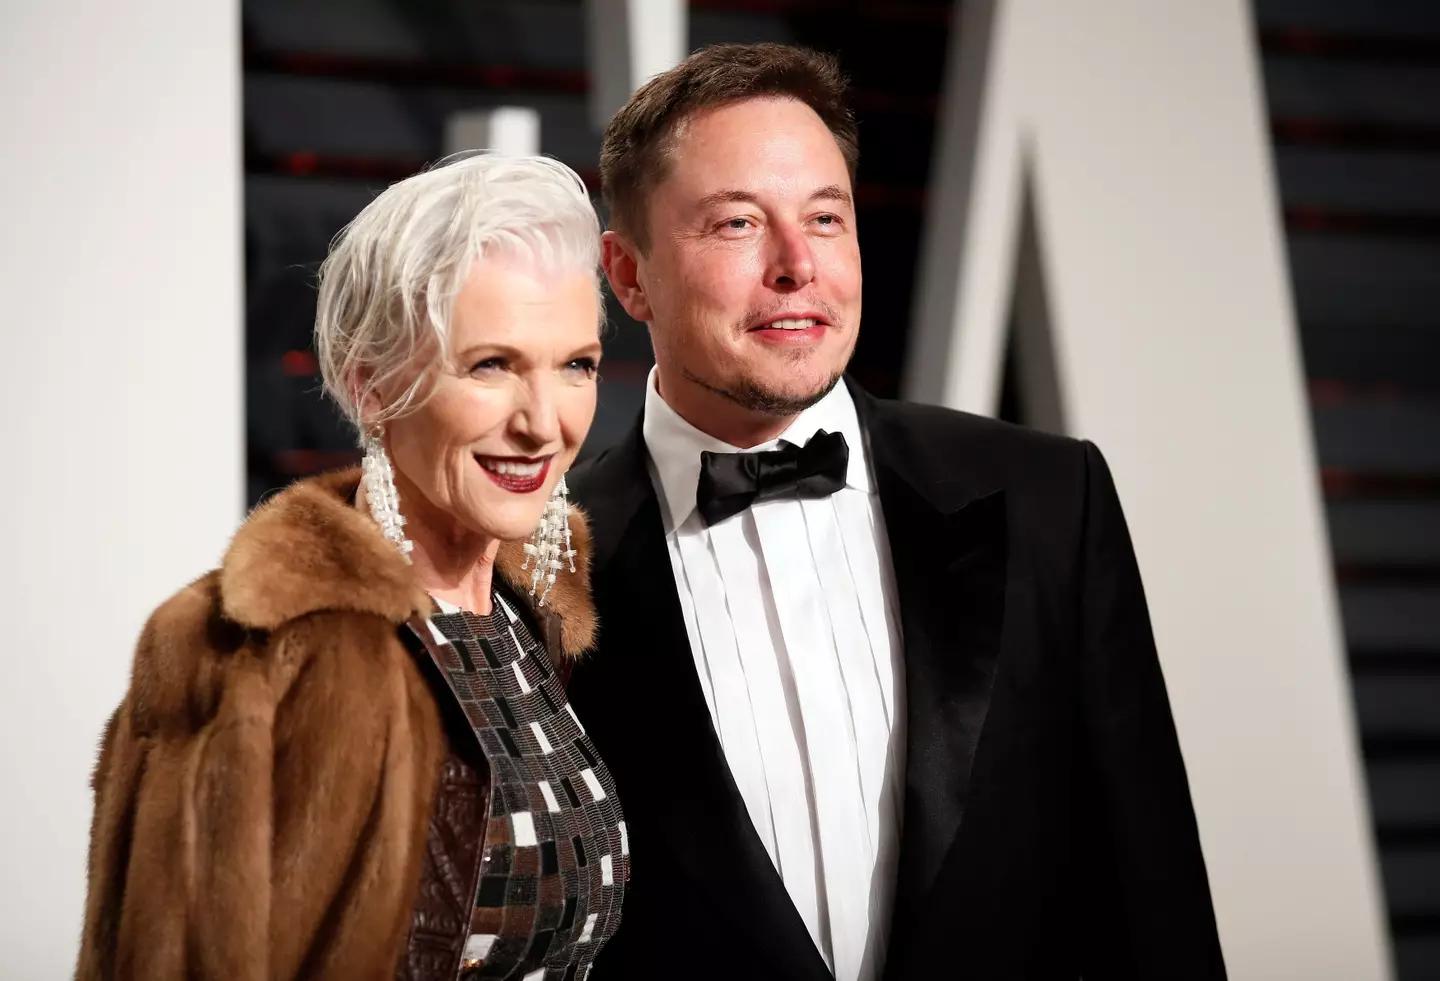 Elon did take her to the Oscars, at least.